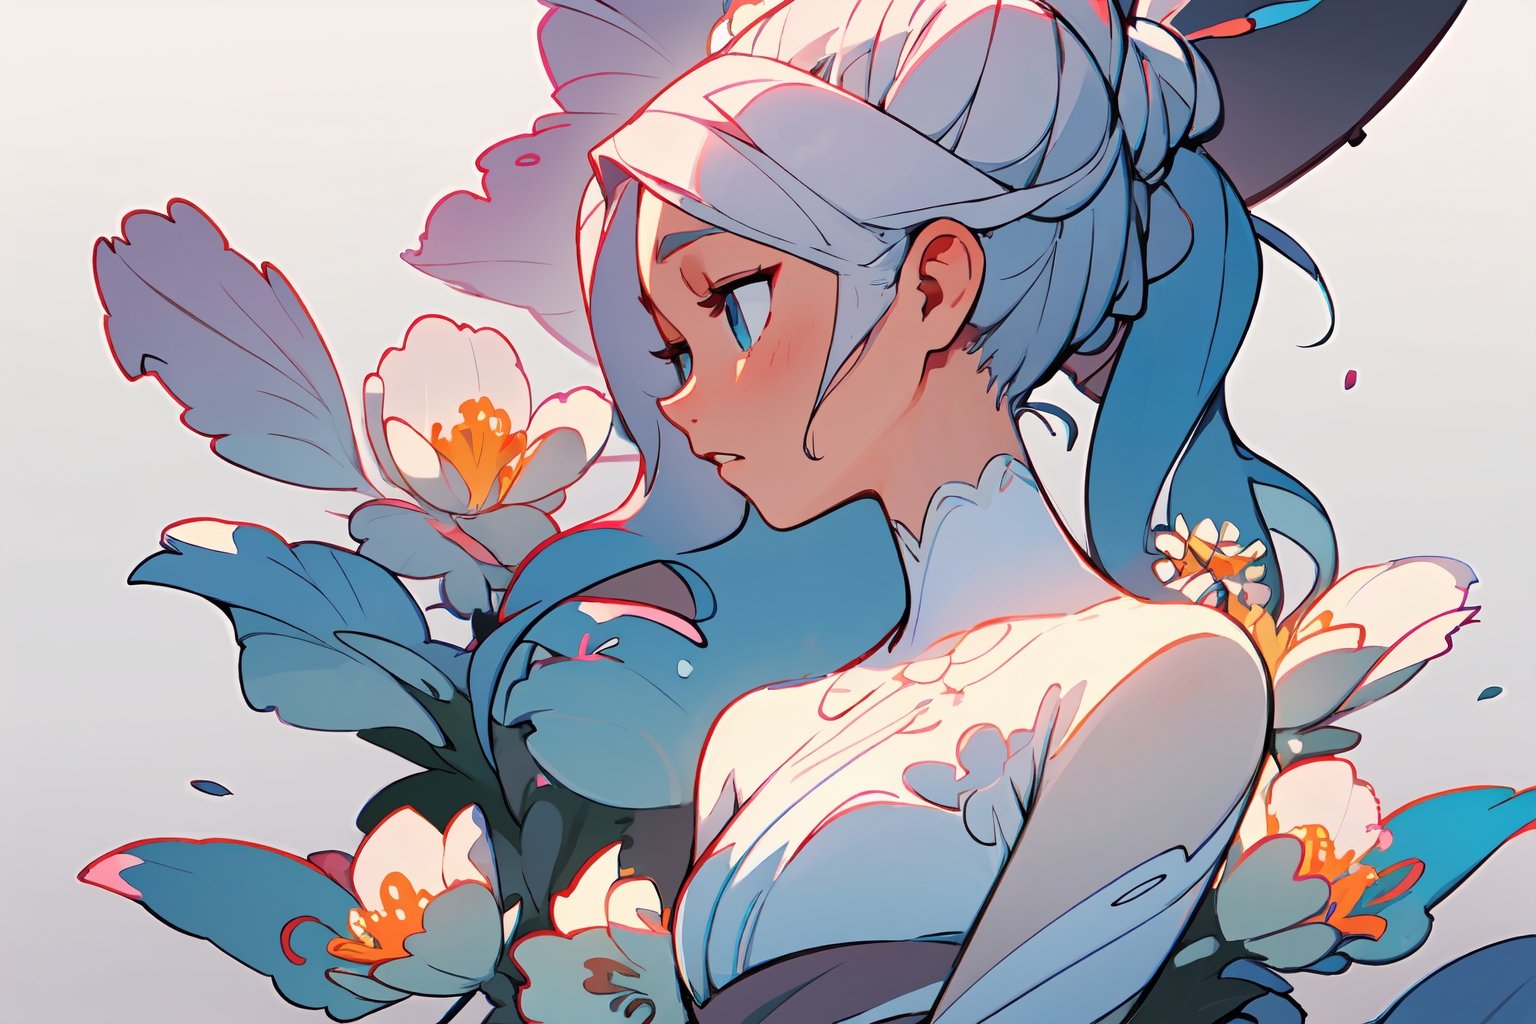 masterpiece, best quality, extremely detailed, Animated character, Female profile, Delicate features, Flowers in hair,Serene expression, Slightly downcast eyes, Soft skin texture, Ear visible, White attire, Subtle gradient background, High resolution, Realistic rendering.